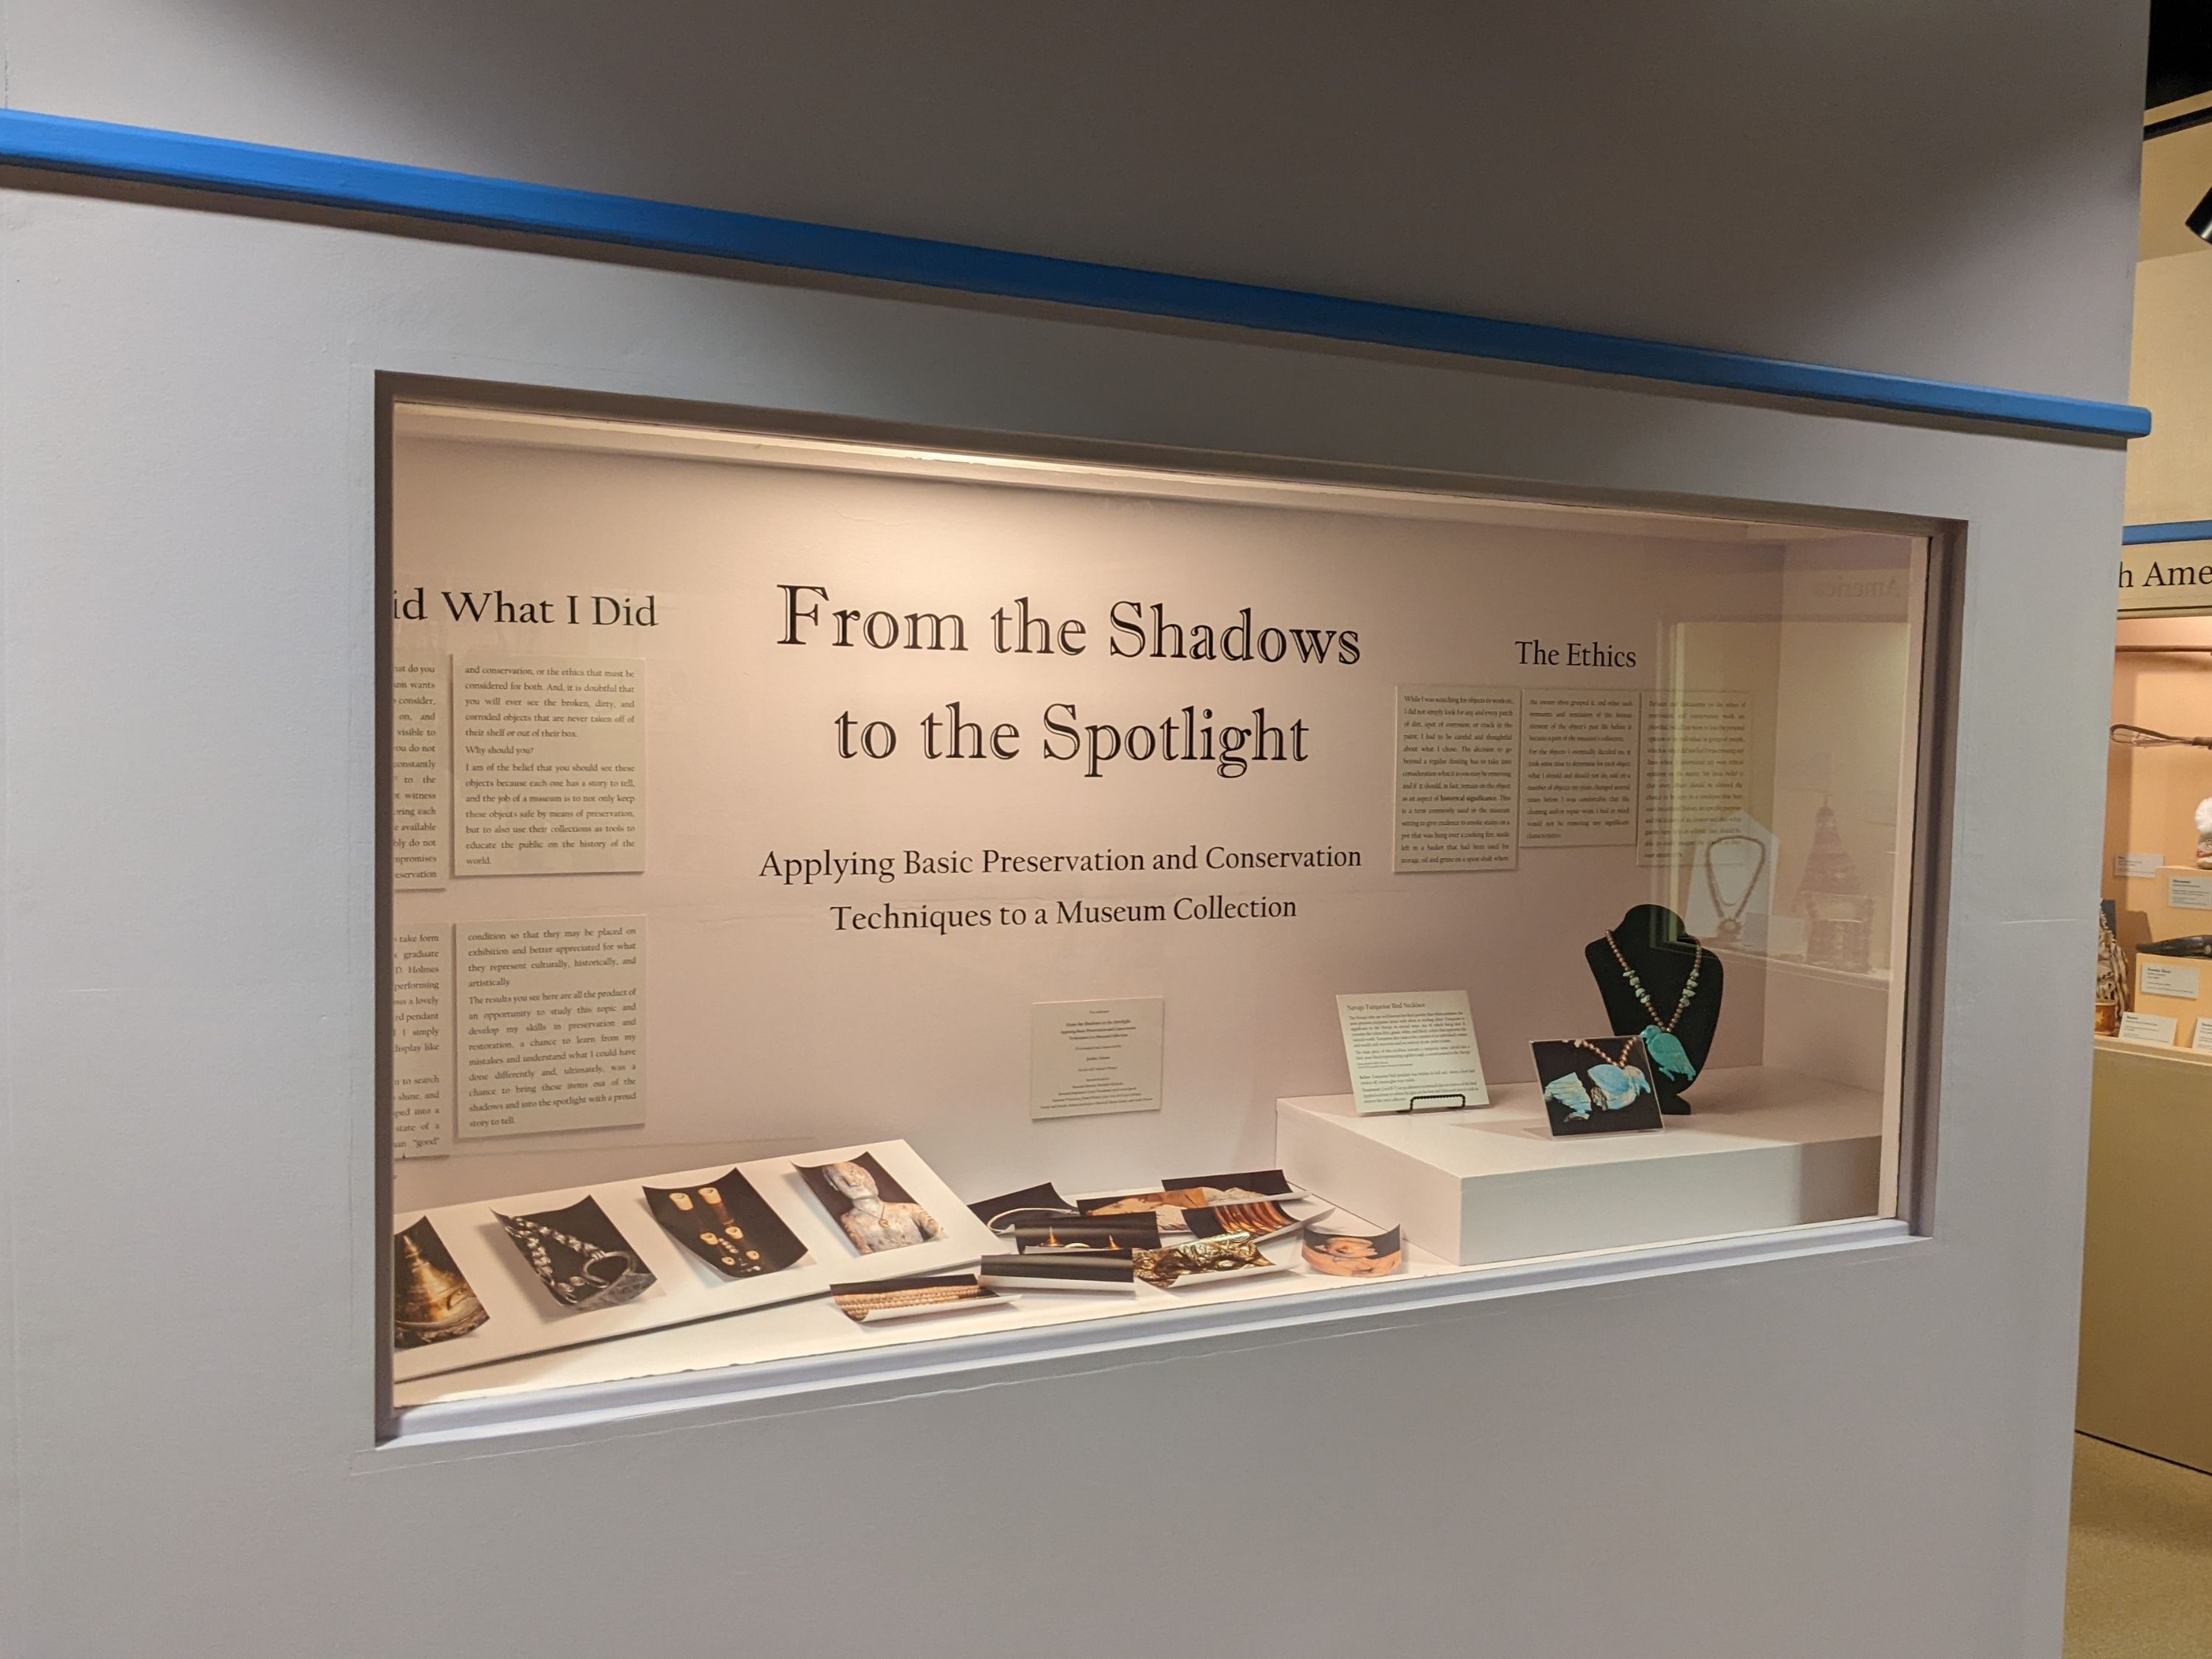 The exhibit narrative starts on this case. This features the curation statement on the project and the ethics behind it. Below this text is a display of various close-up photographs of objects featured in exhibit cases. On the far right, the first object is a turquoise bird necklace.